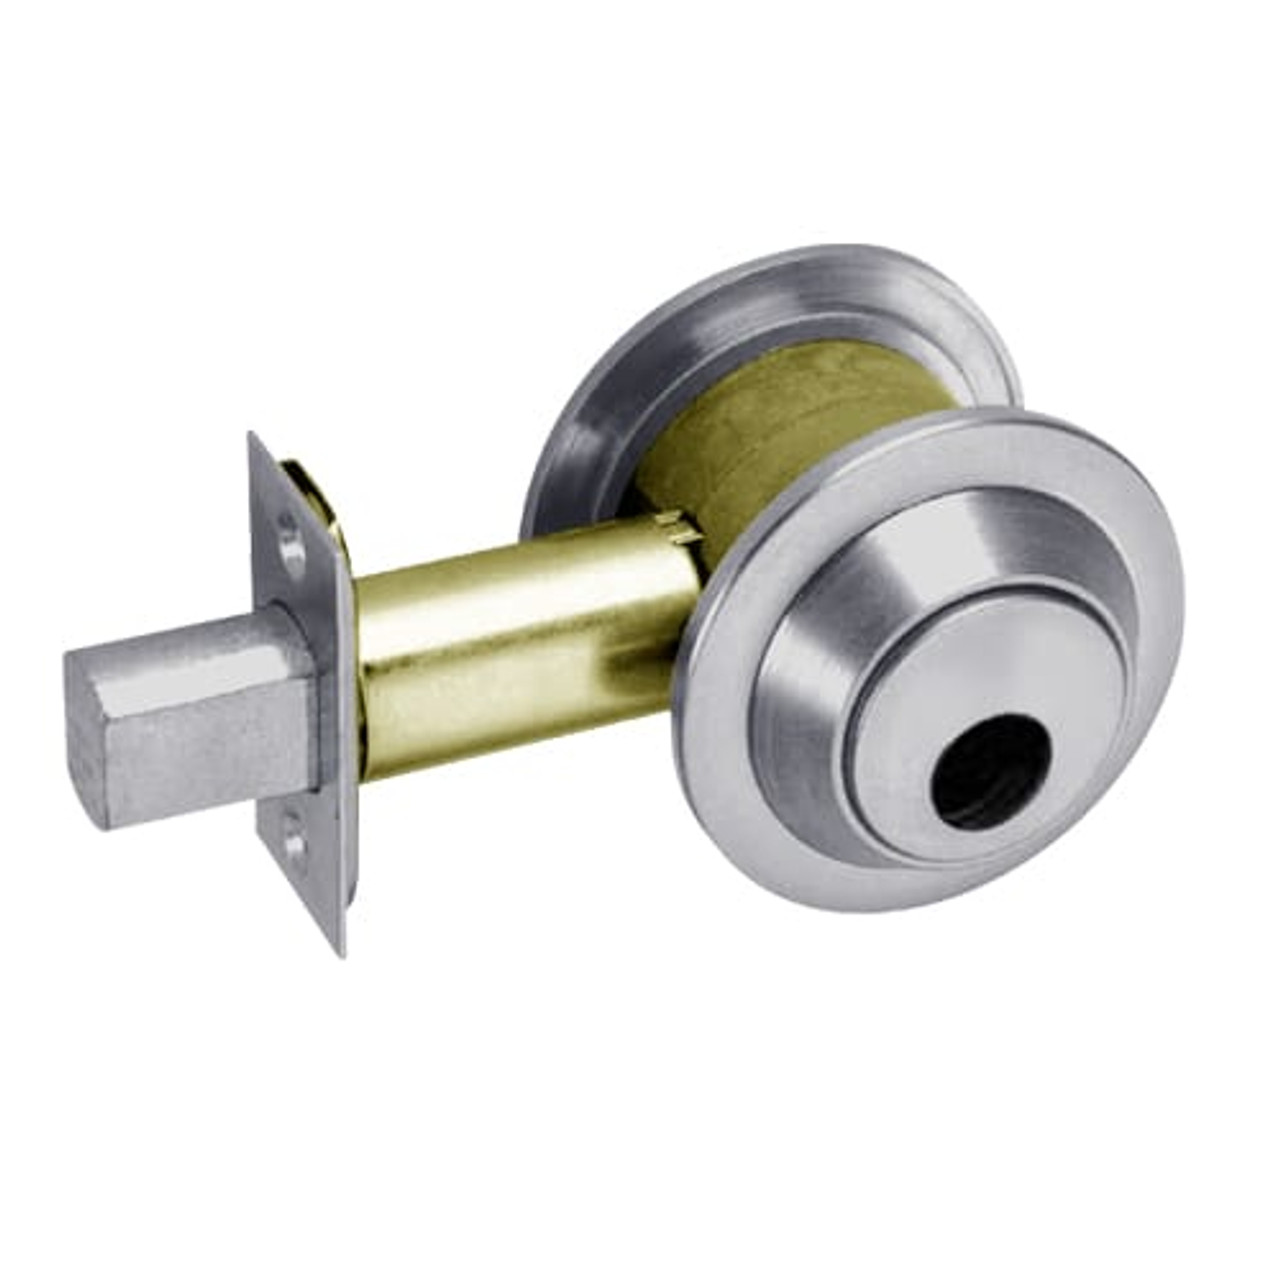 DL3012-626-LC Corbin DL3000 Series Cylindrical Deadlocks with Double Cylinder in Satin Chrome Finish